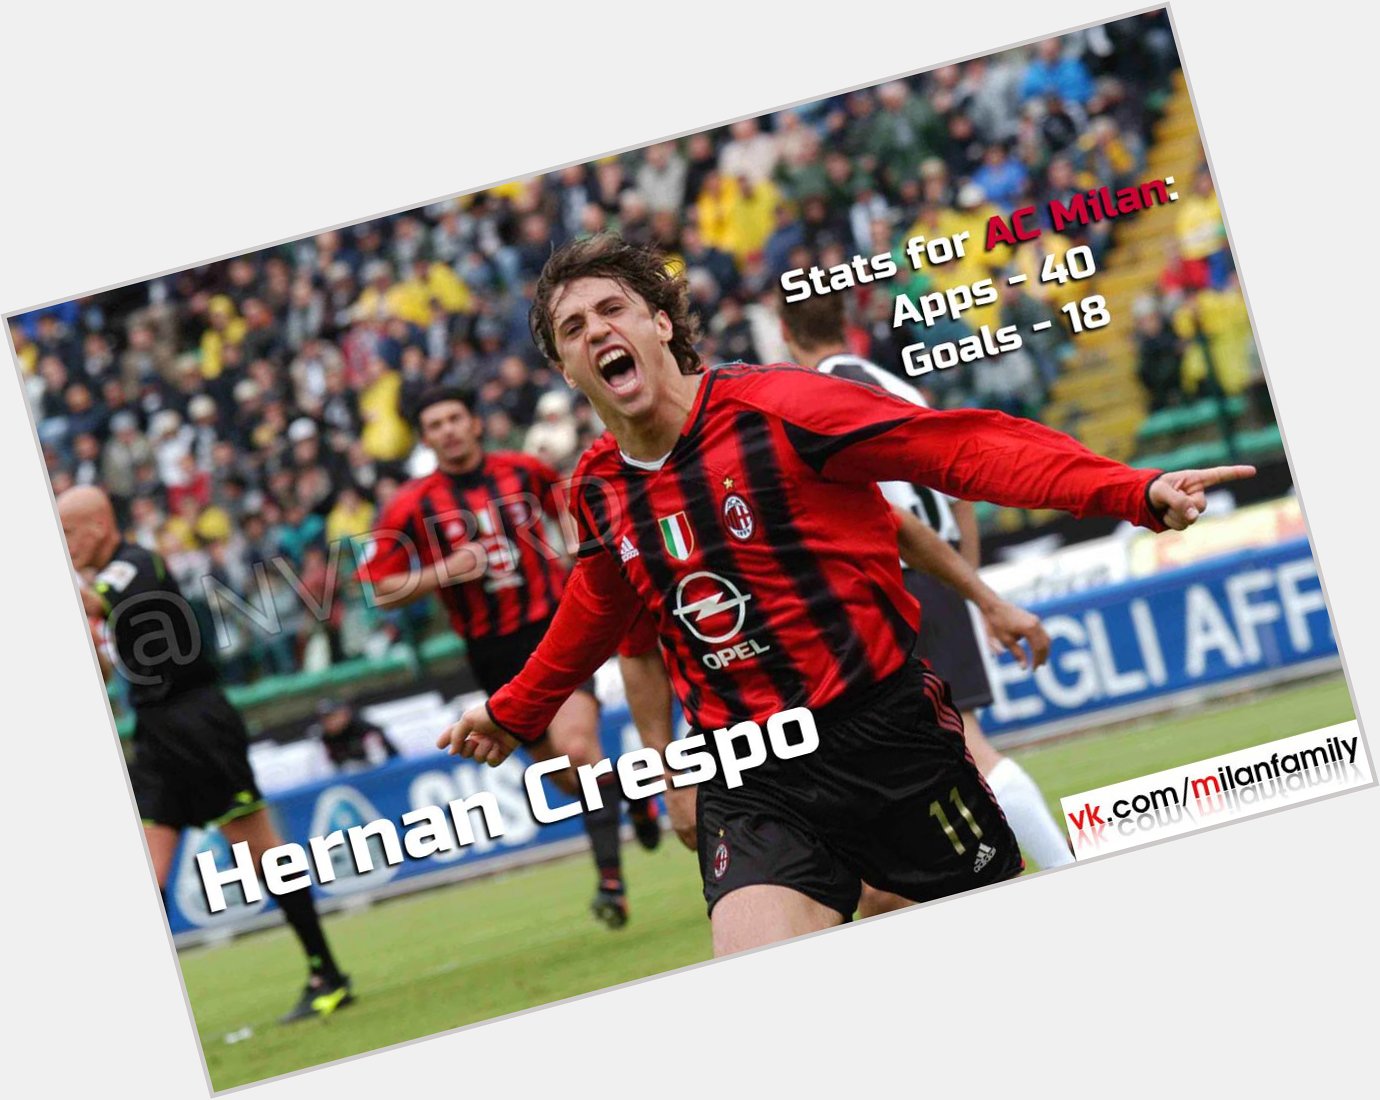 Happy Birthday to Hernan who turns 40 today!

In AC Milan he scored 18 goals in 40 apps! Congratulations! 